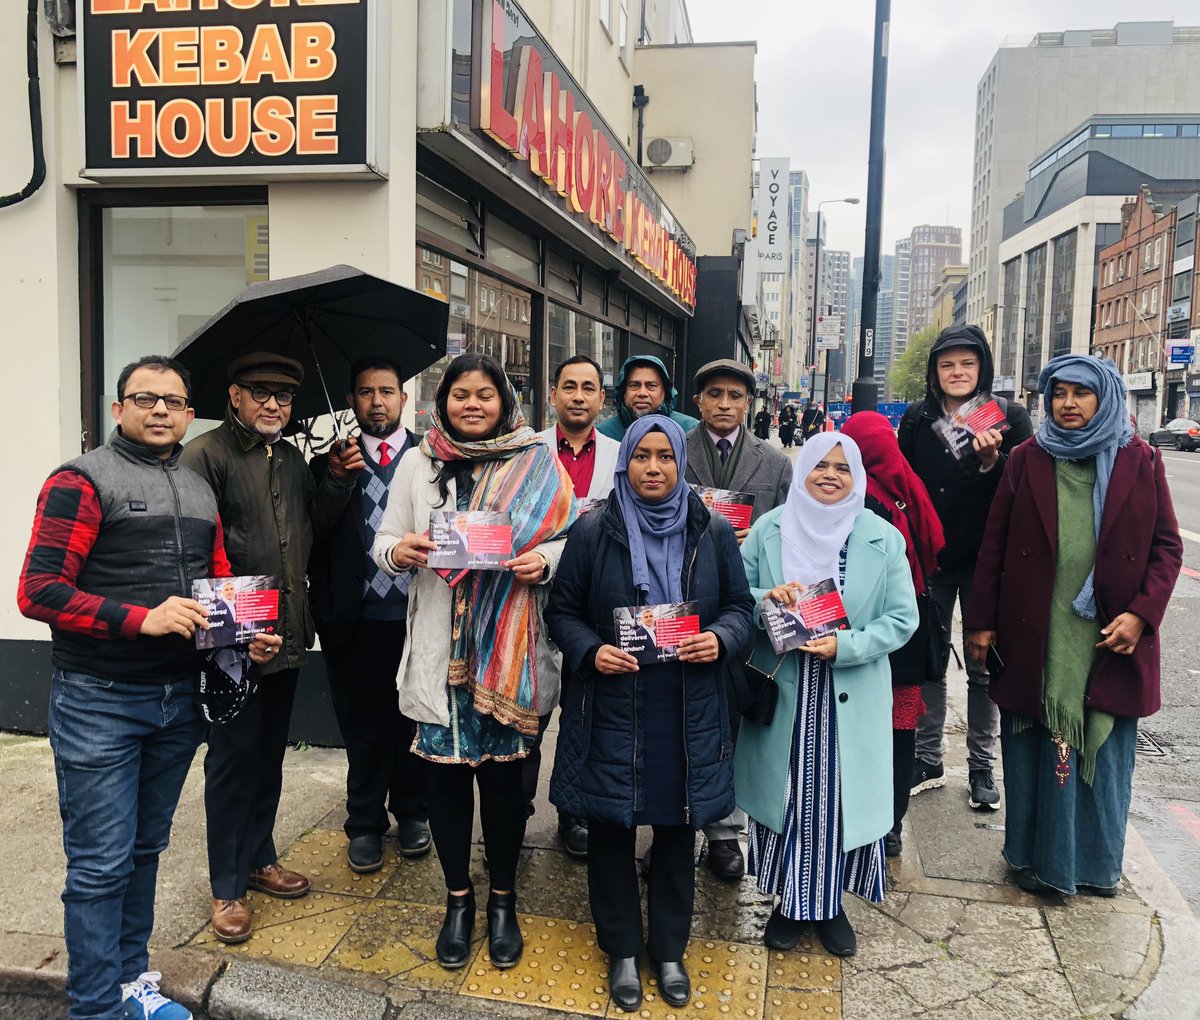 Labour doorstep this rainy evening for @SadiqKhan and @unmeshdesai in Whitechapel ward organised by Bethnal Green and Stepney CLP women’s branch.